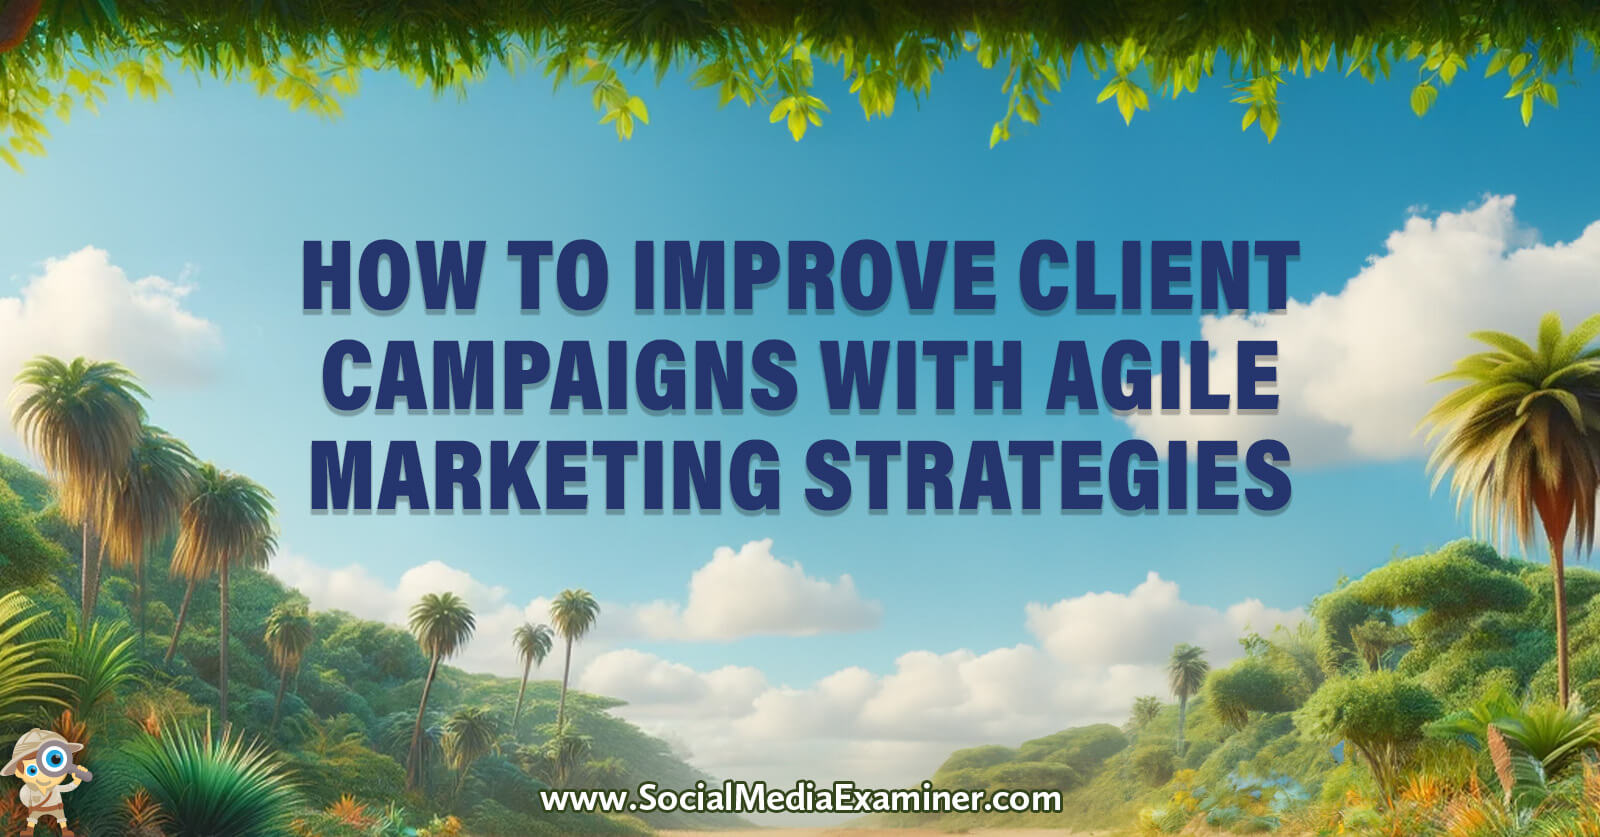 How to Improve Client Campaigns With Agile Marketing Strategies by Social Media Examiner